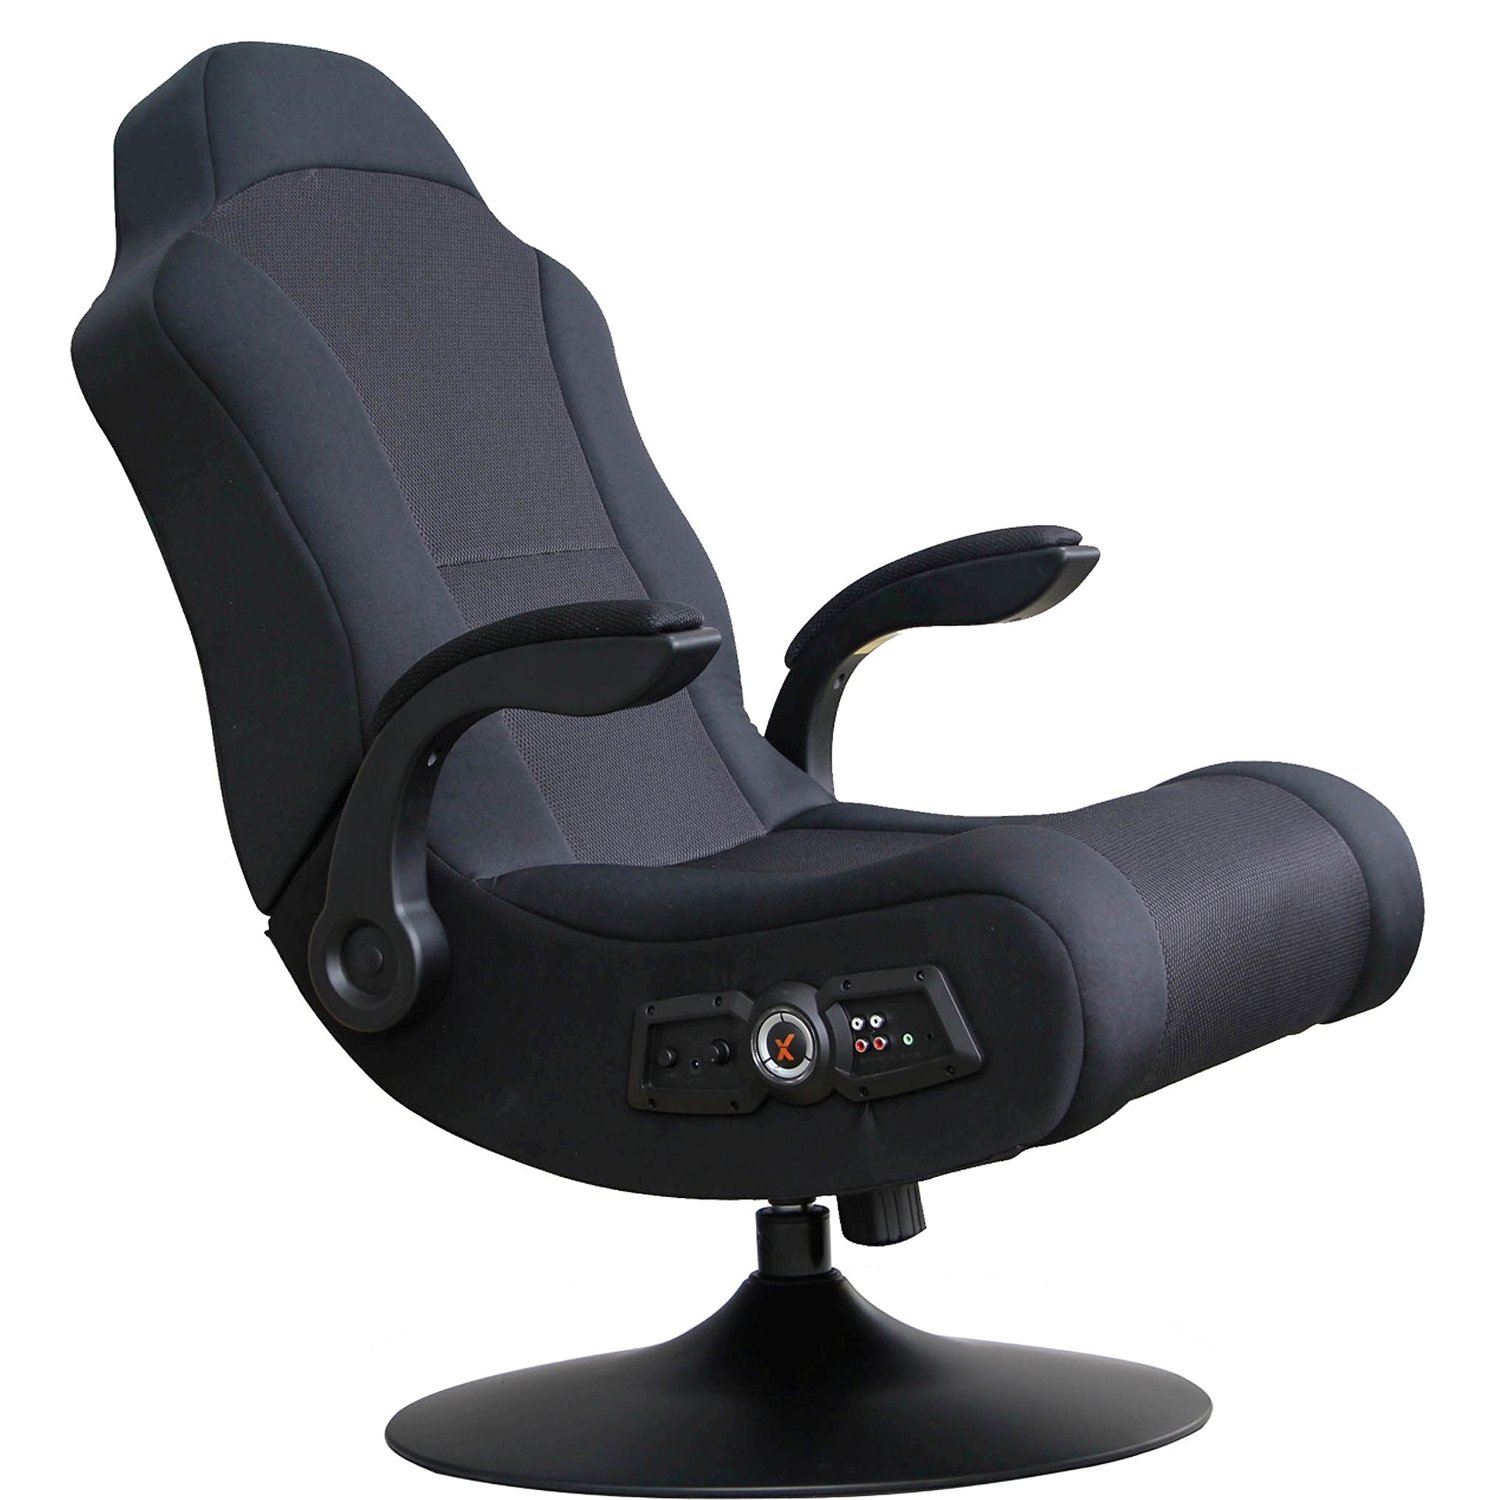 Best Rocker Gaming Chairs 2018 – Buyer’s Guide